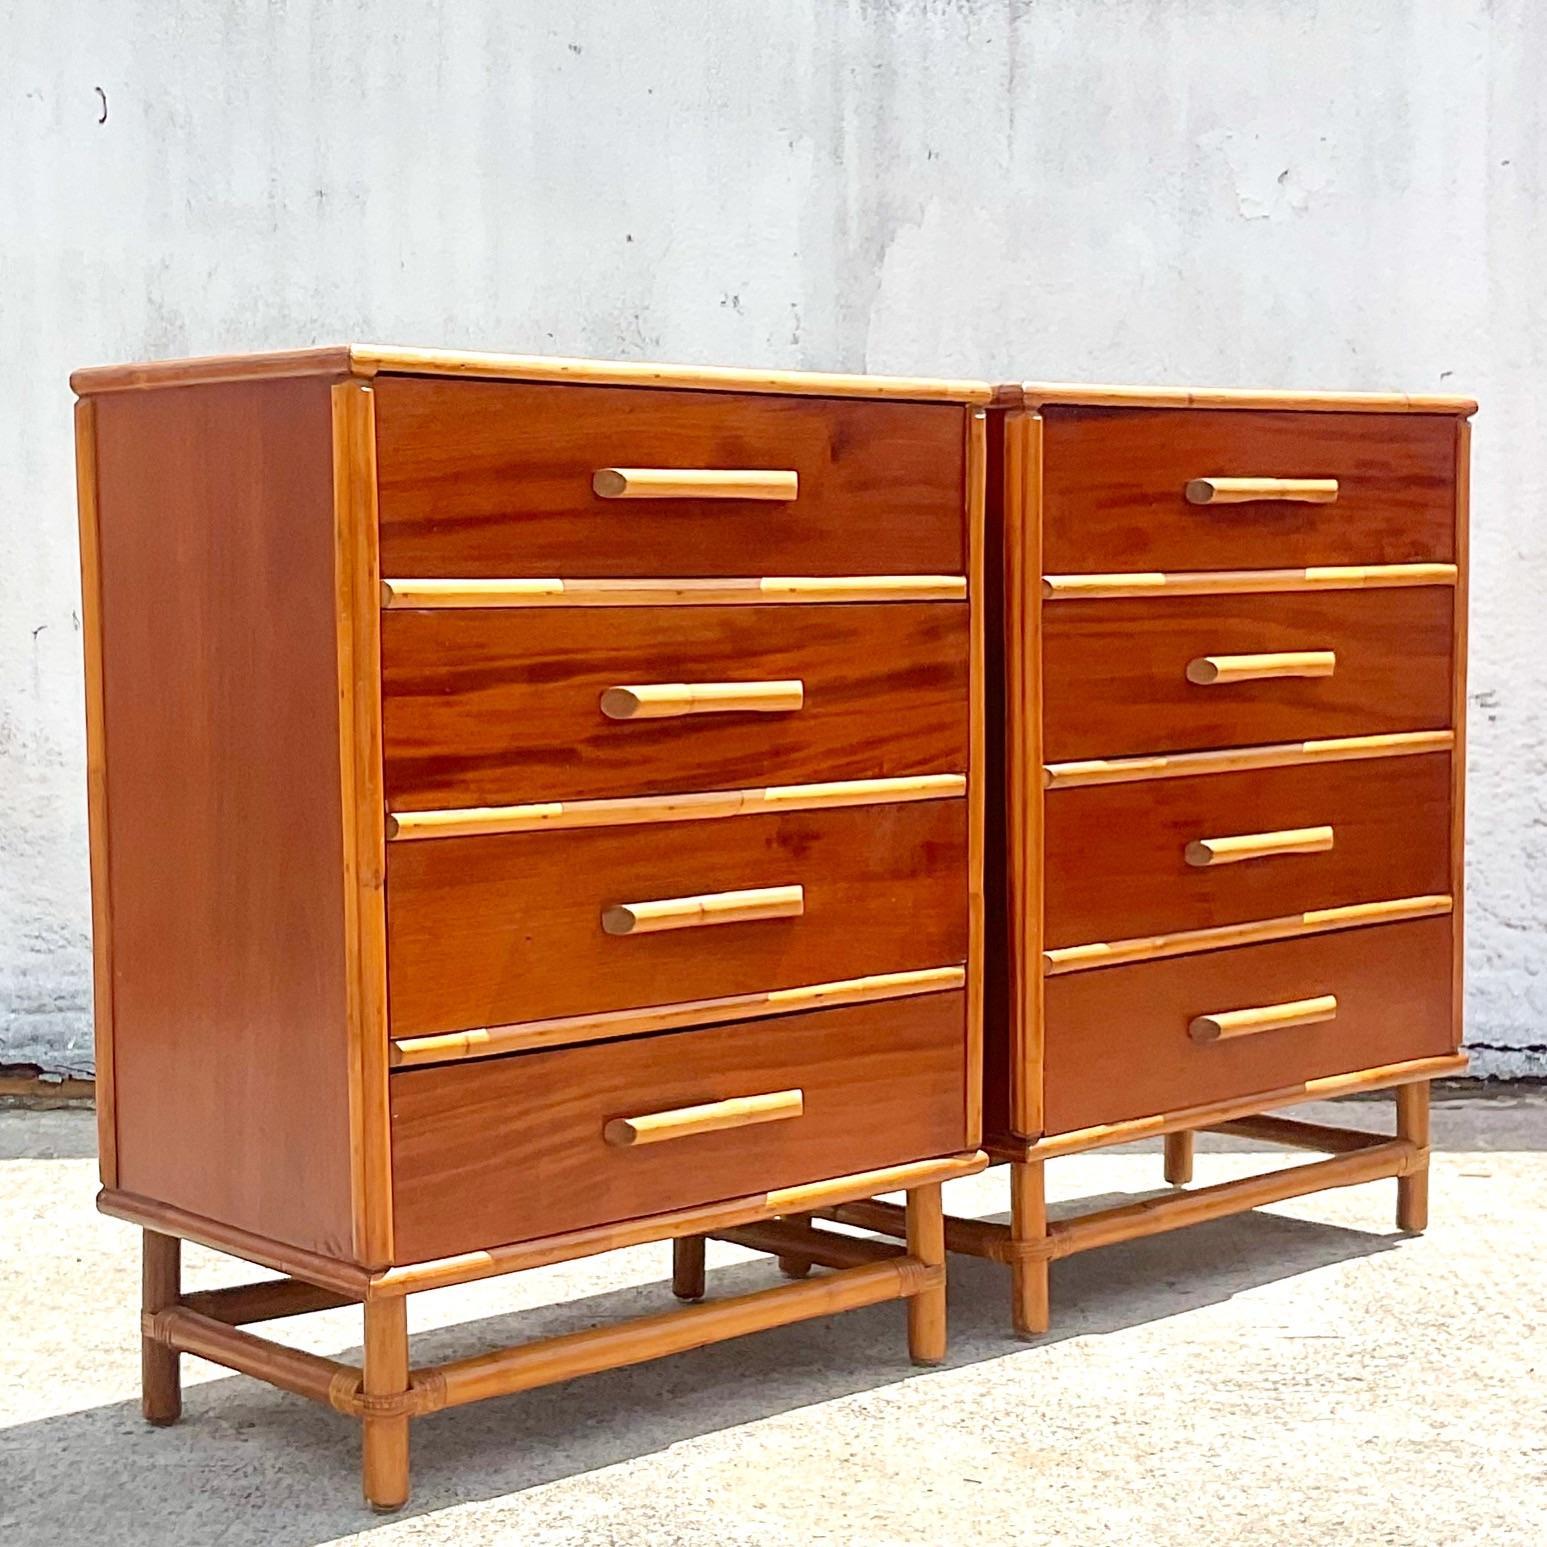 An exceptional pair of vintage 1950s Coastal chest of drawers. Beautiful and tall Mahogany cabinets with rattan trim. Chis brass caps on the ends. Matching dresser also available on my Chairish page. Acquired from a Palm Beach estate. 